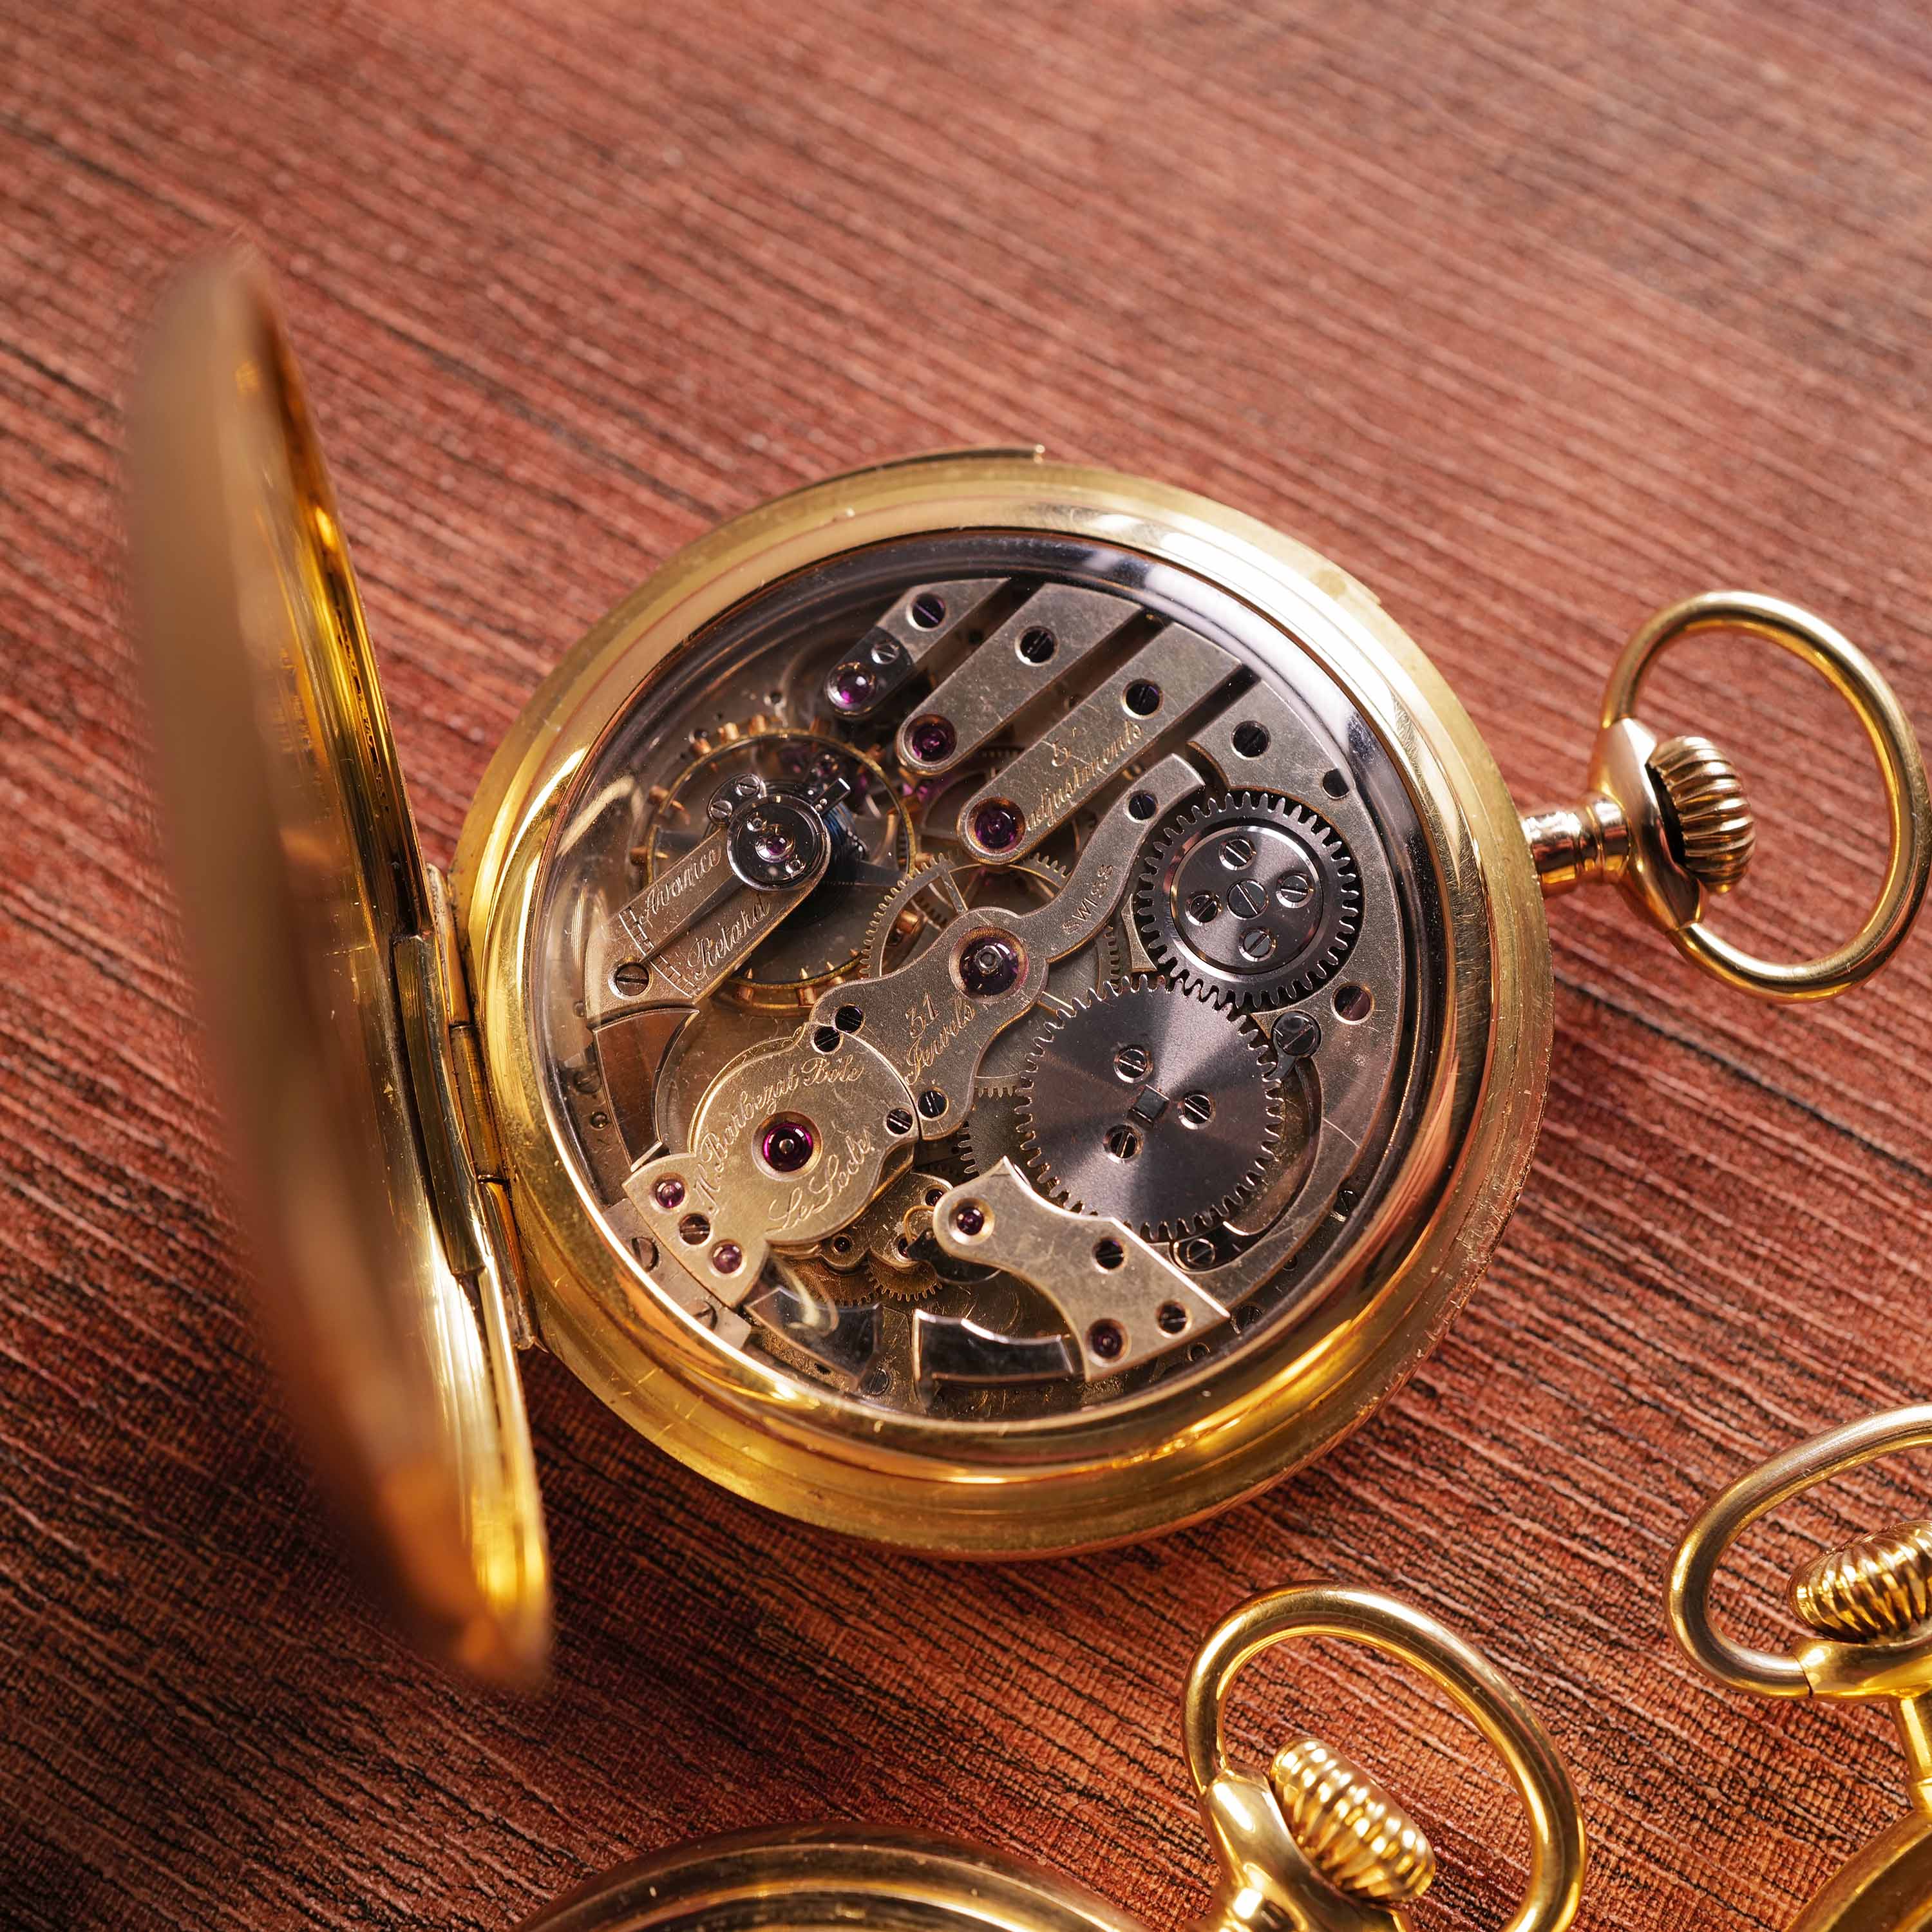 1268PW1 Barbezat-Bôle Le Loche Yellow Gold Minute Repeater Pocket Watch img-main8